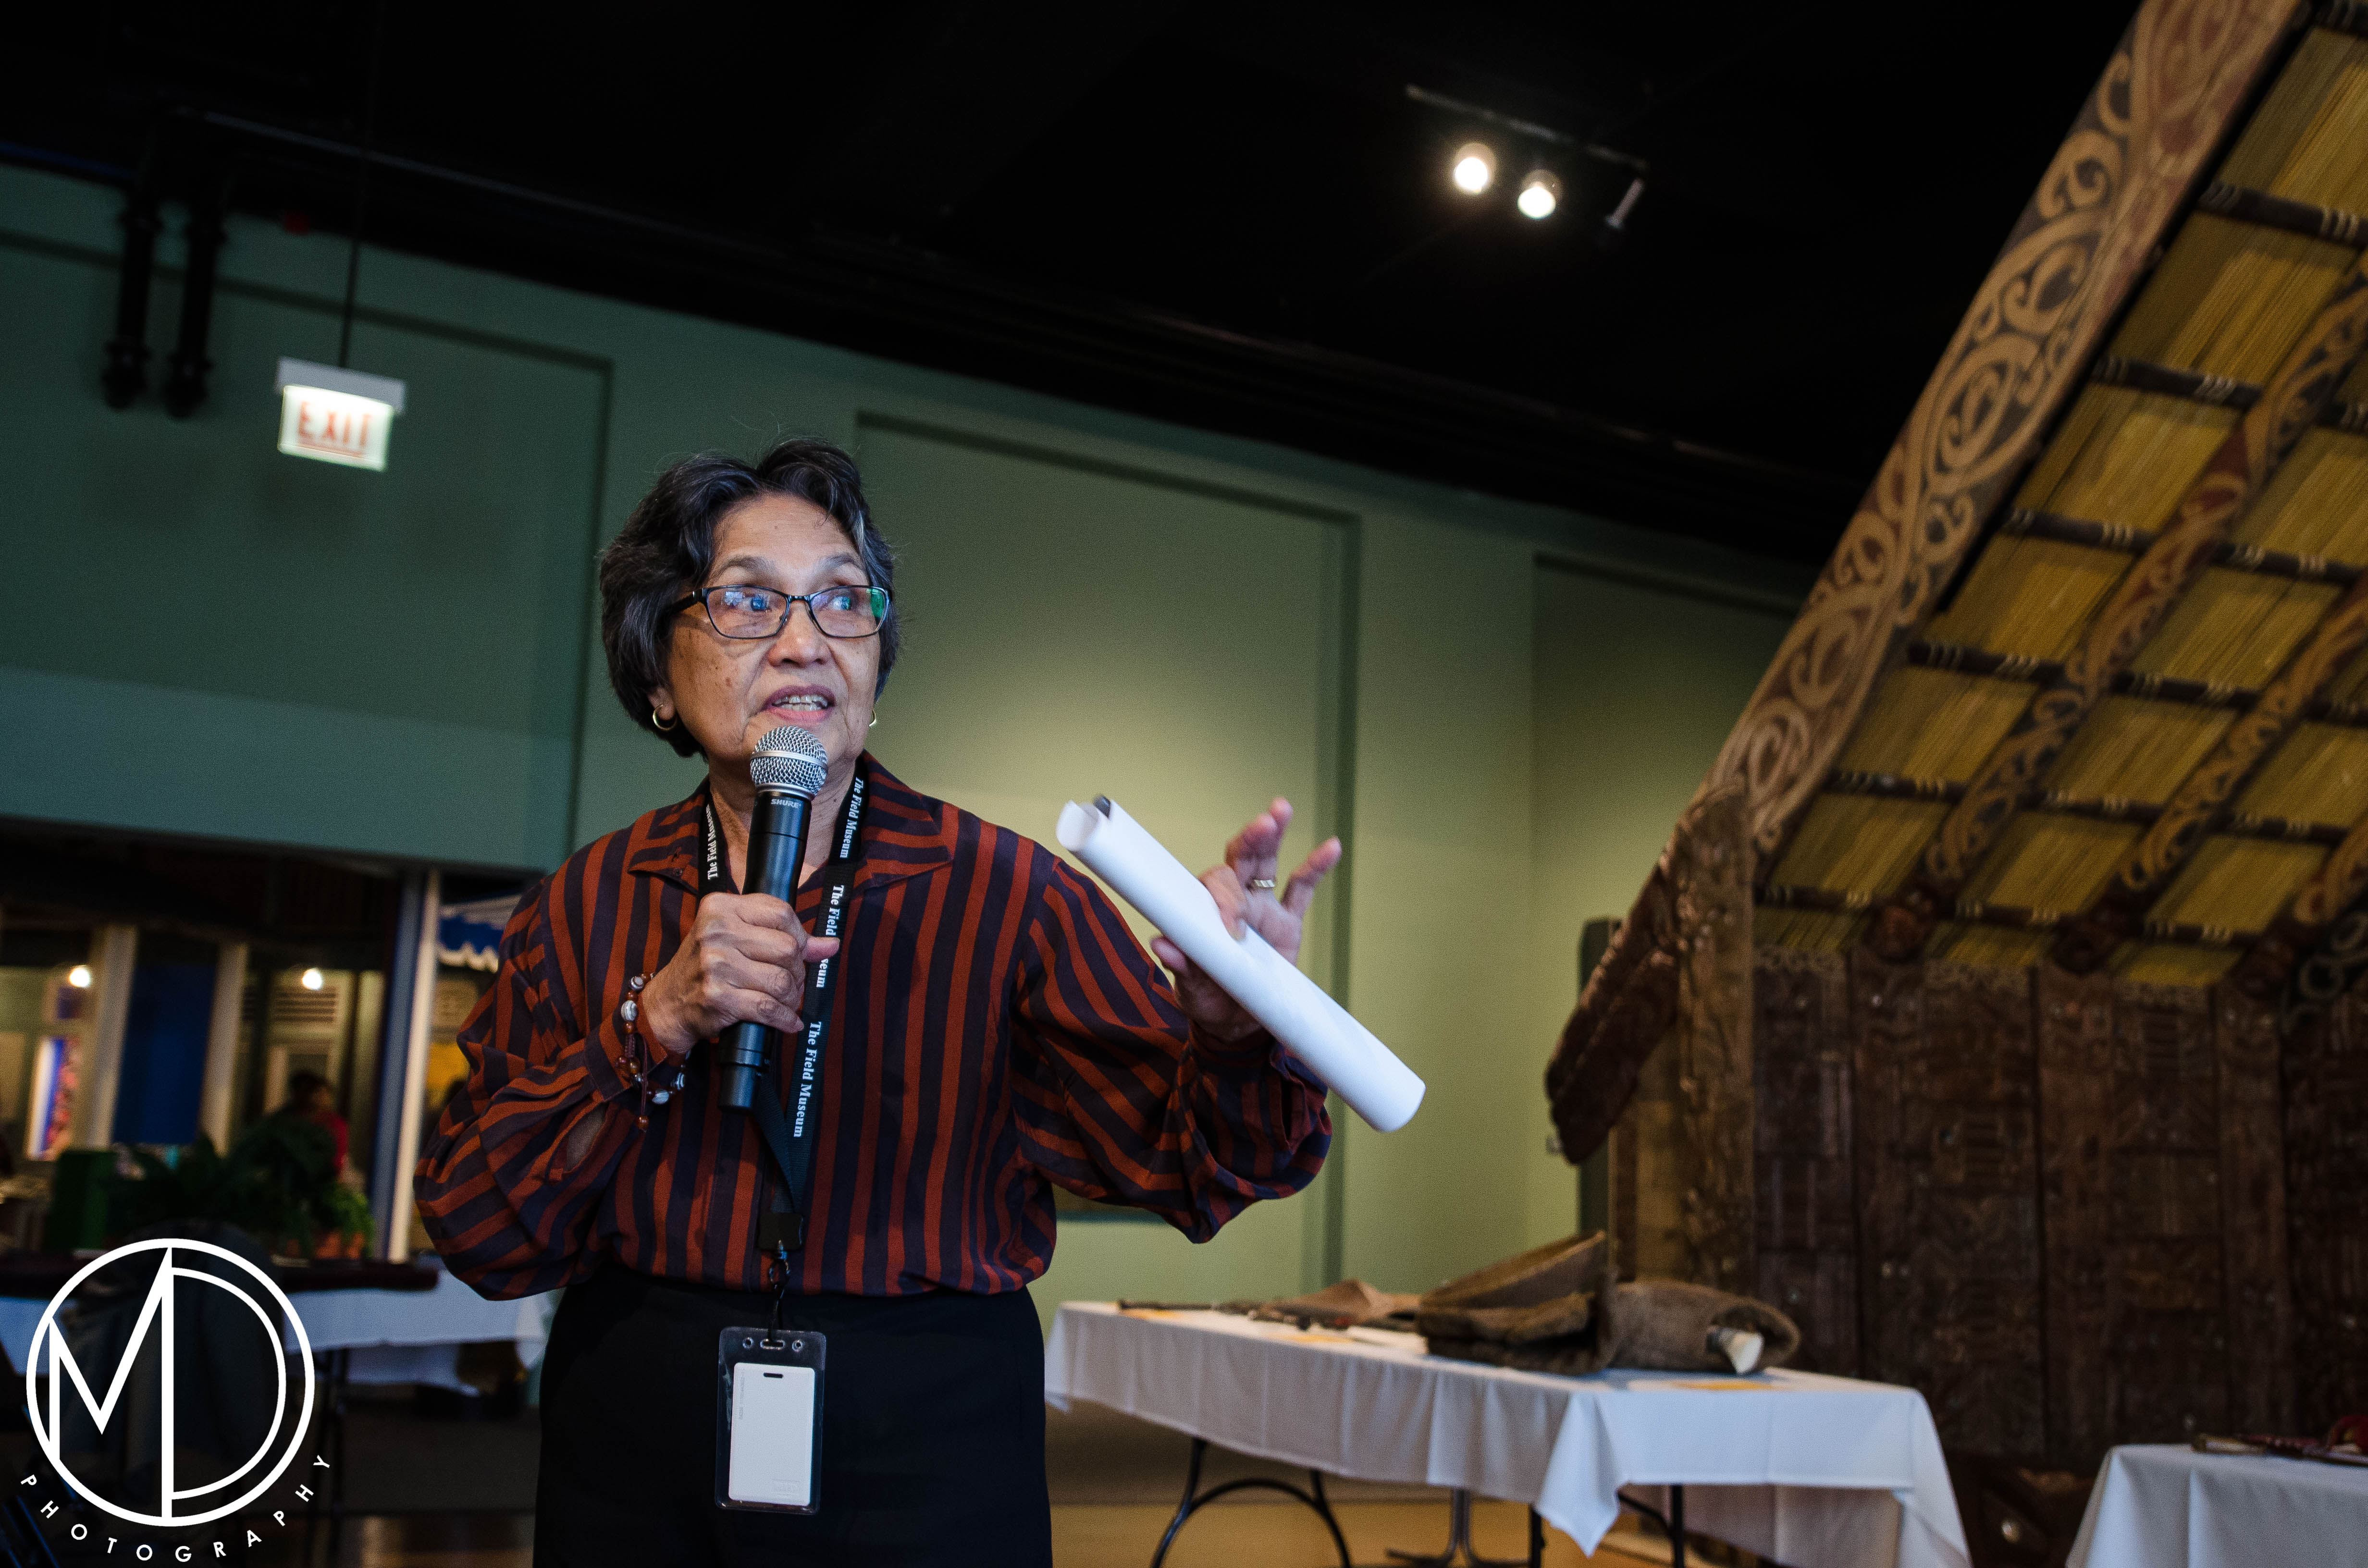 Juanita Salvador-Burris sharing during the event. (c) Field Museum of Natural History - CC BY-NC 4.0